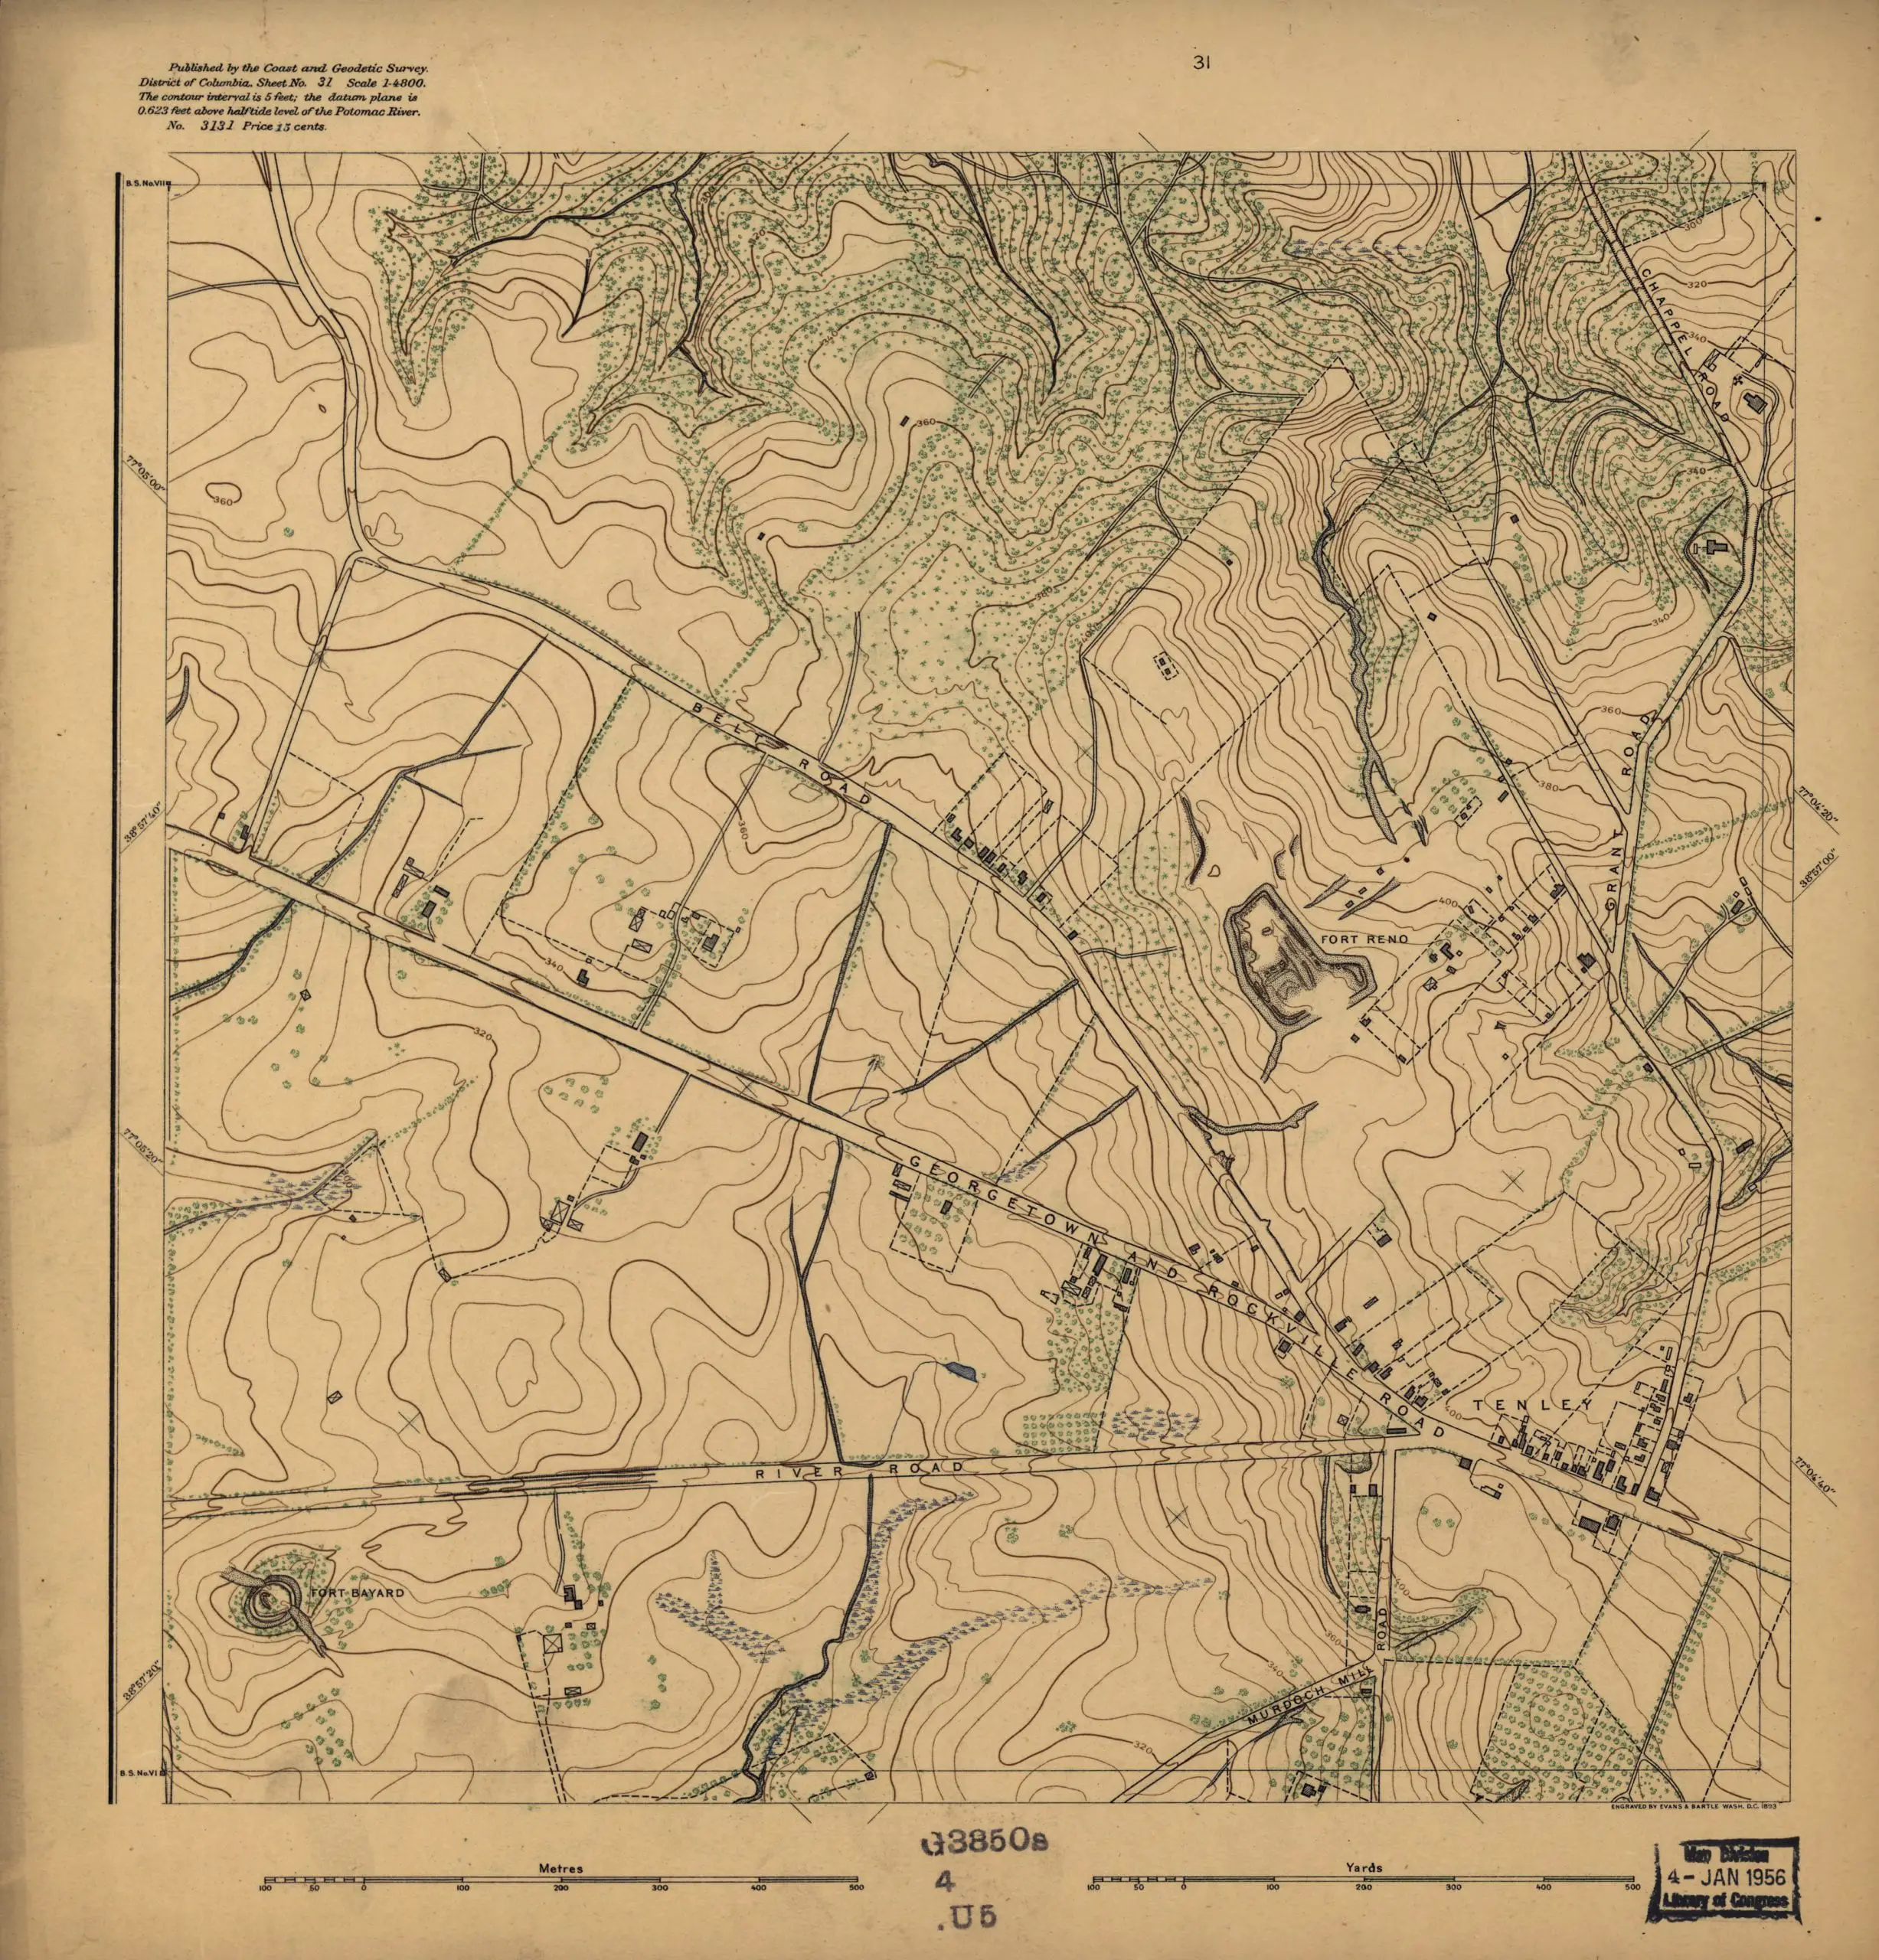 Topographic map showing lot lines, buildings, and woods.  Covers District of Columbia outside former Washington city limits (Florida Avenue).